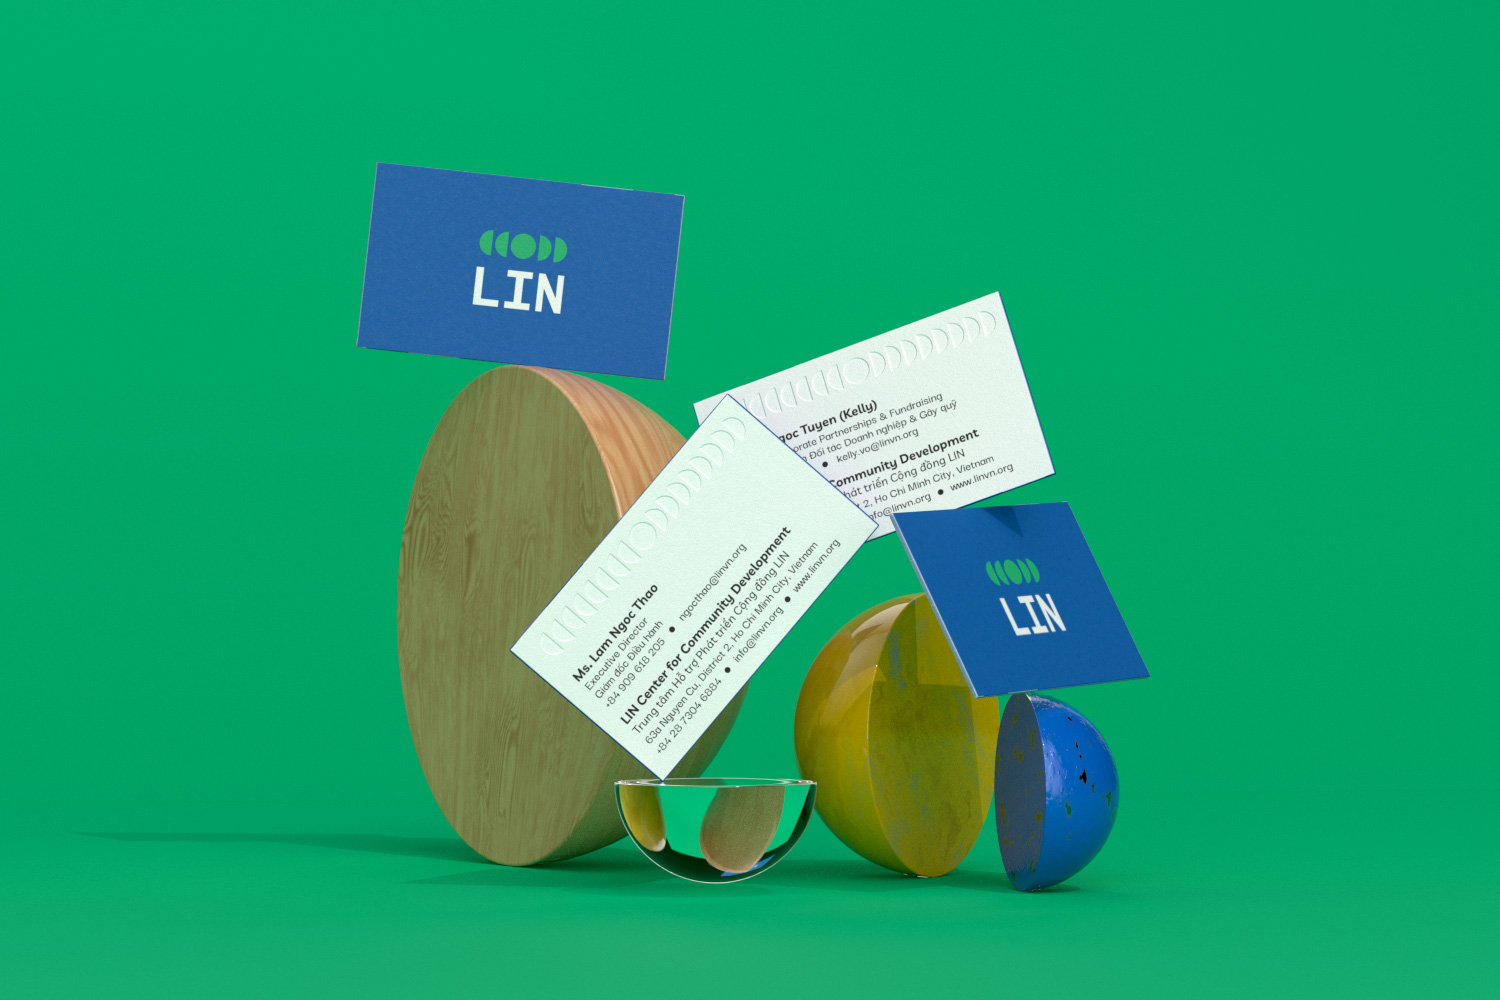 LIN business cards with props